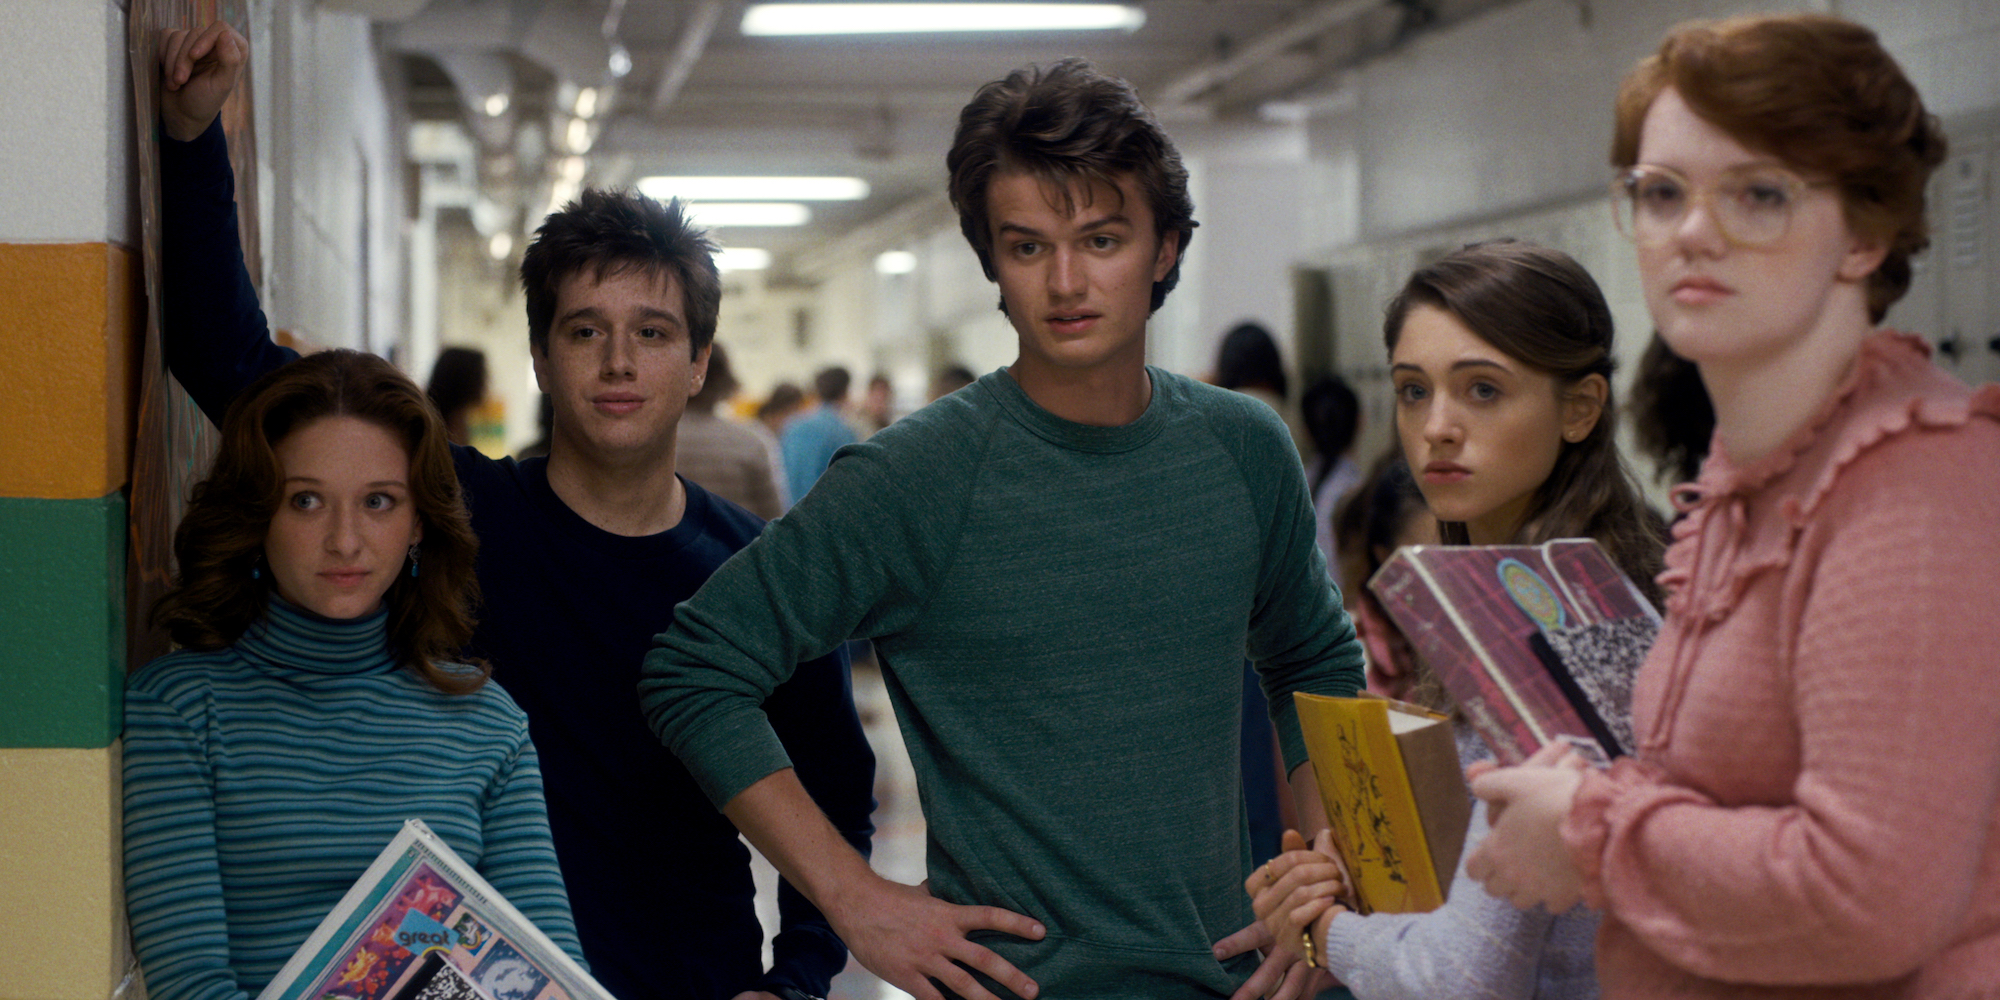 A production still of Tommy, Carol, Steve, and Nancy in Stranger Things Season 1